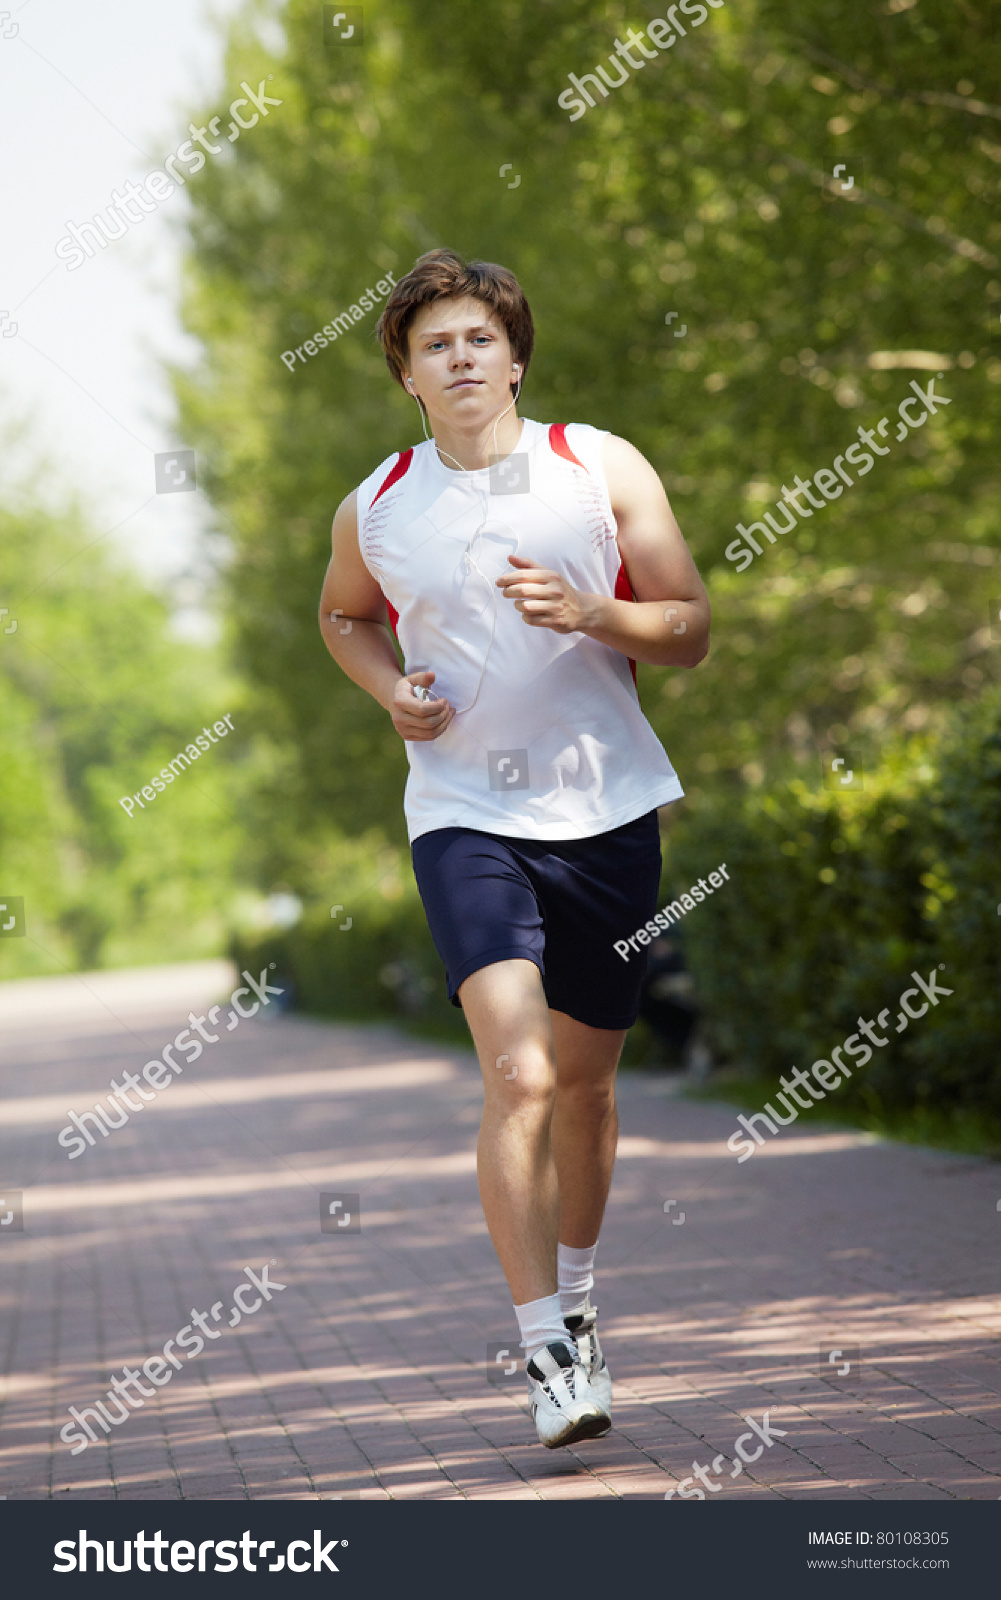 Portrait Of A Young Man Jogging With A Walkman In Park Stock Photo ...